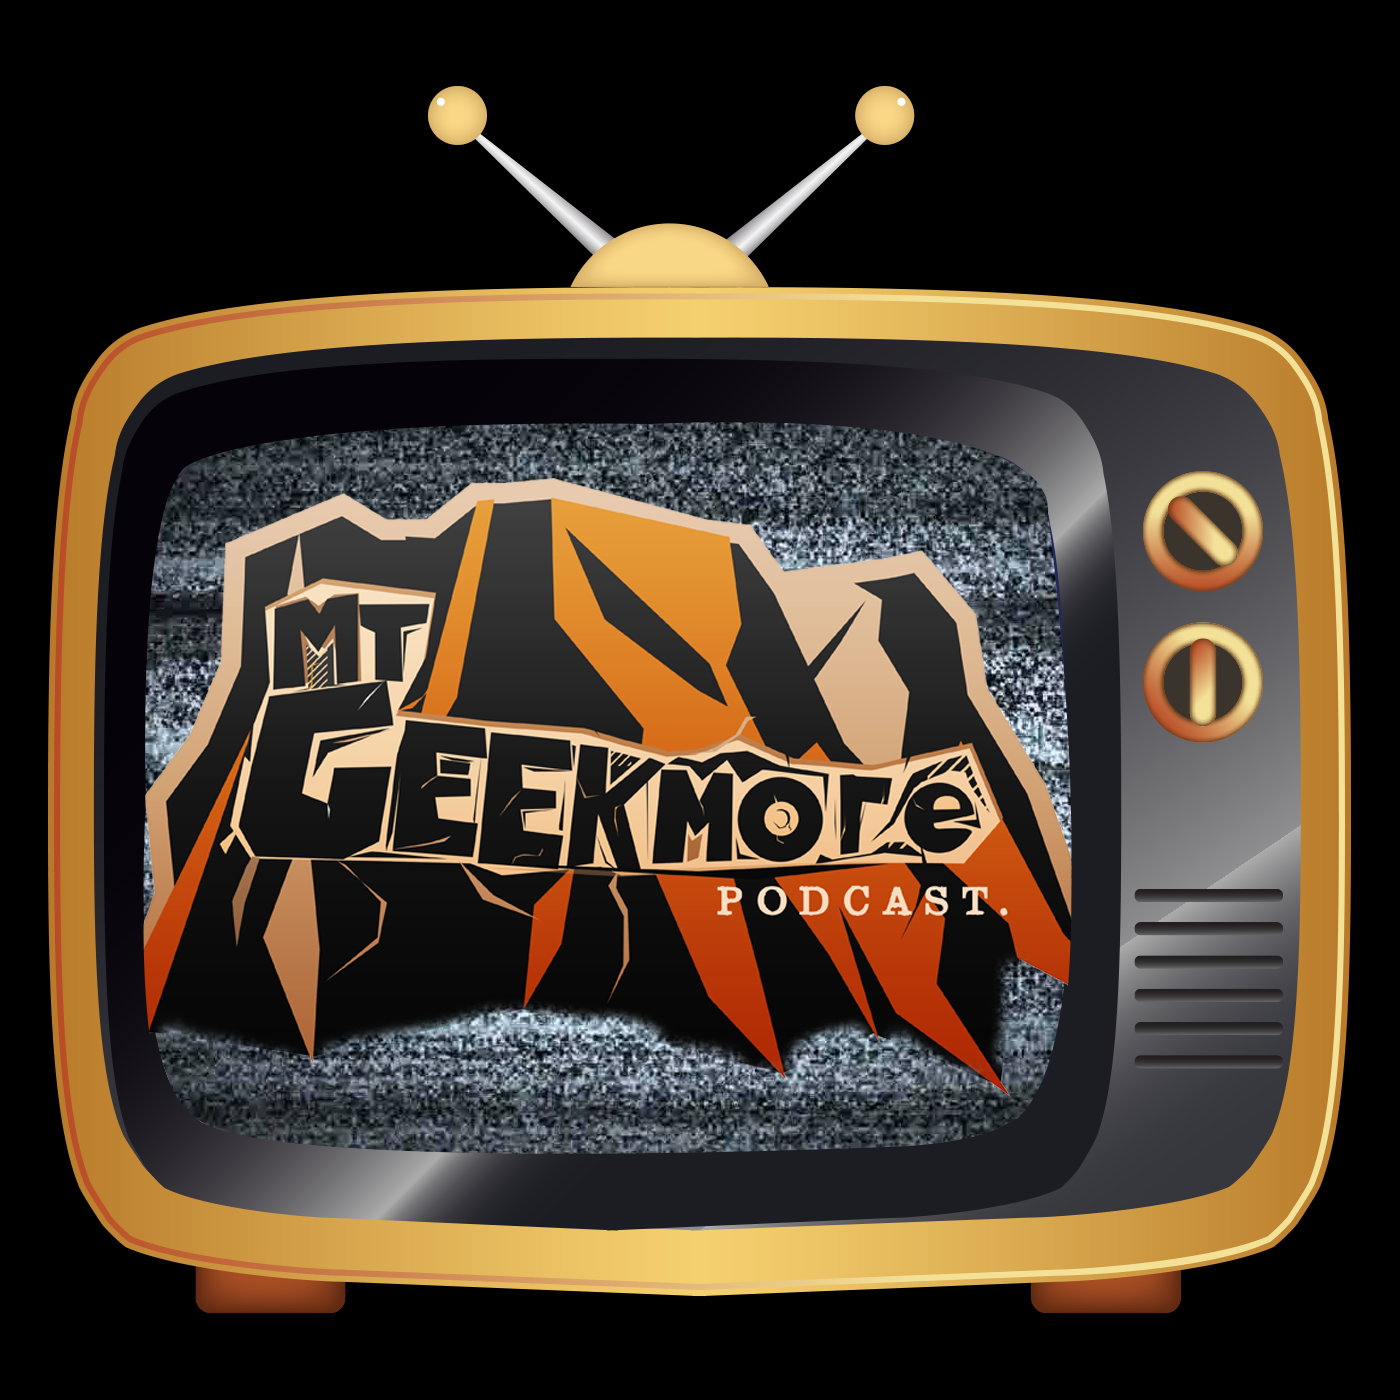 Geekmore 21 - BEST 1 HIT Wonder from 2000s